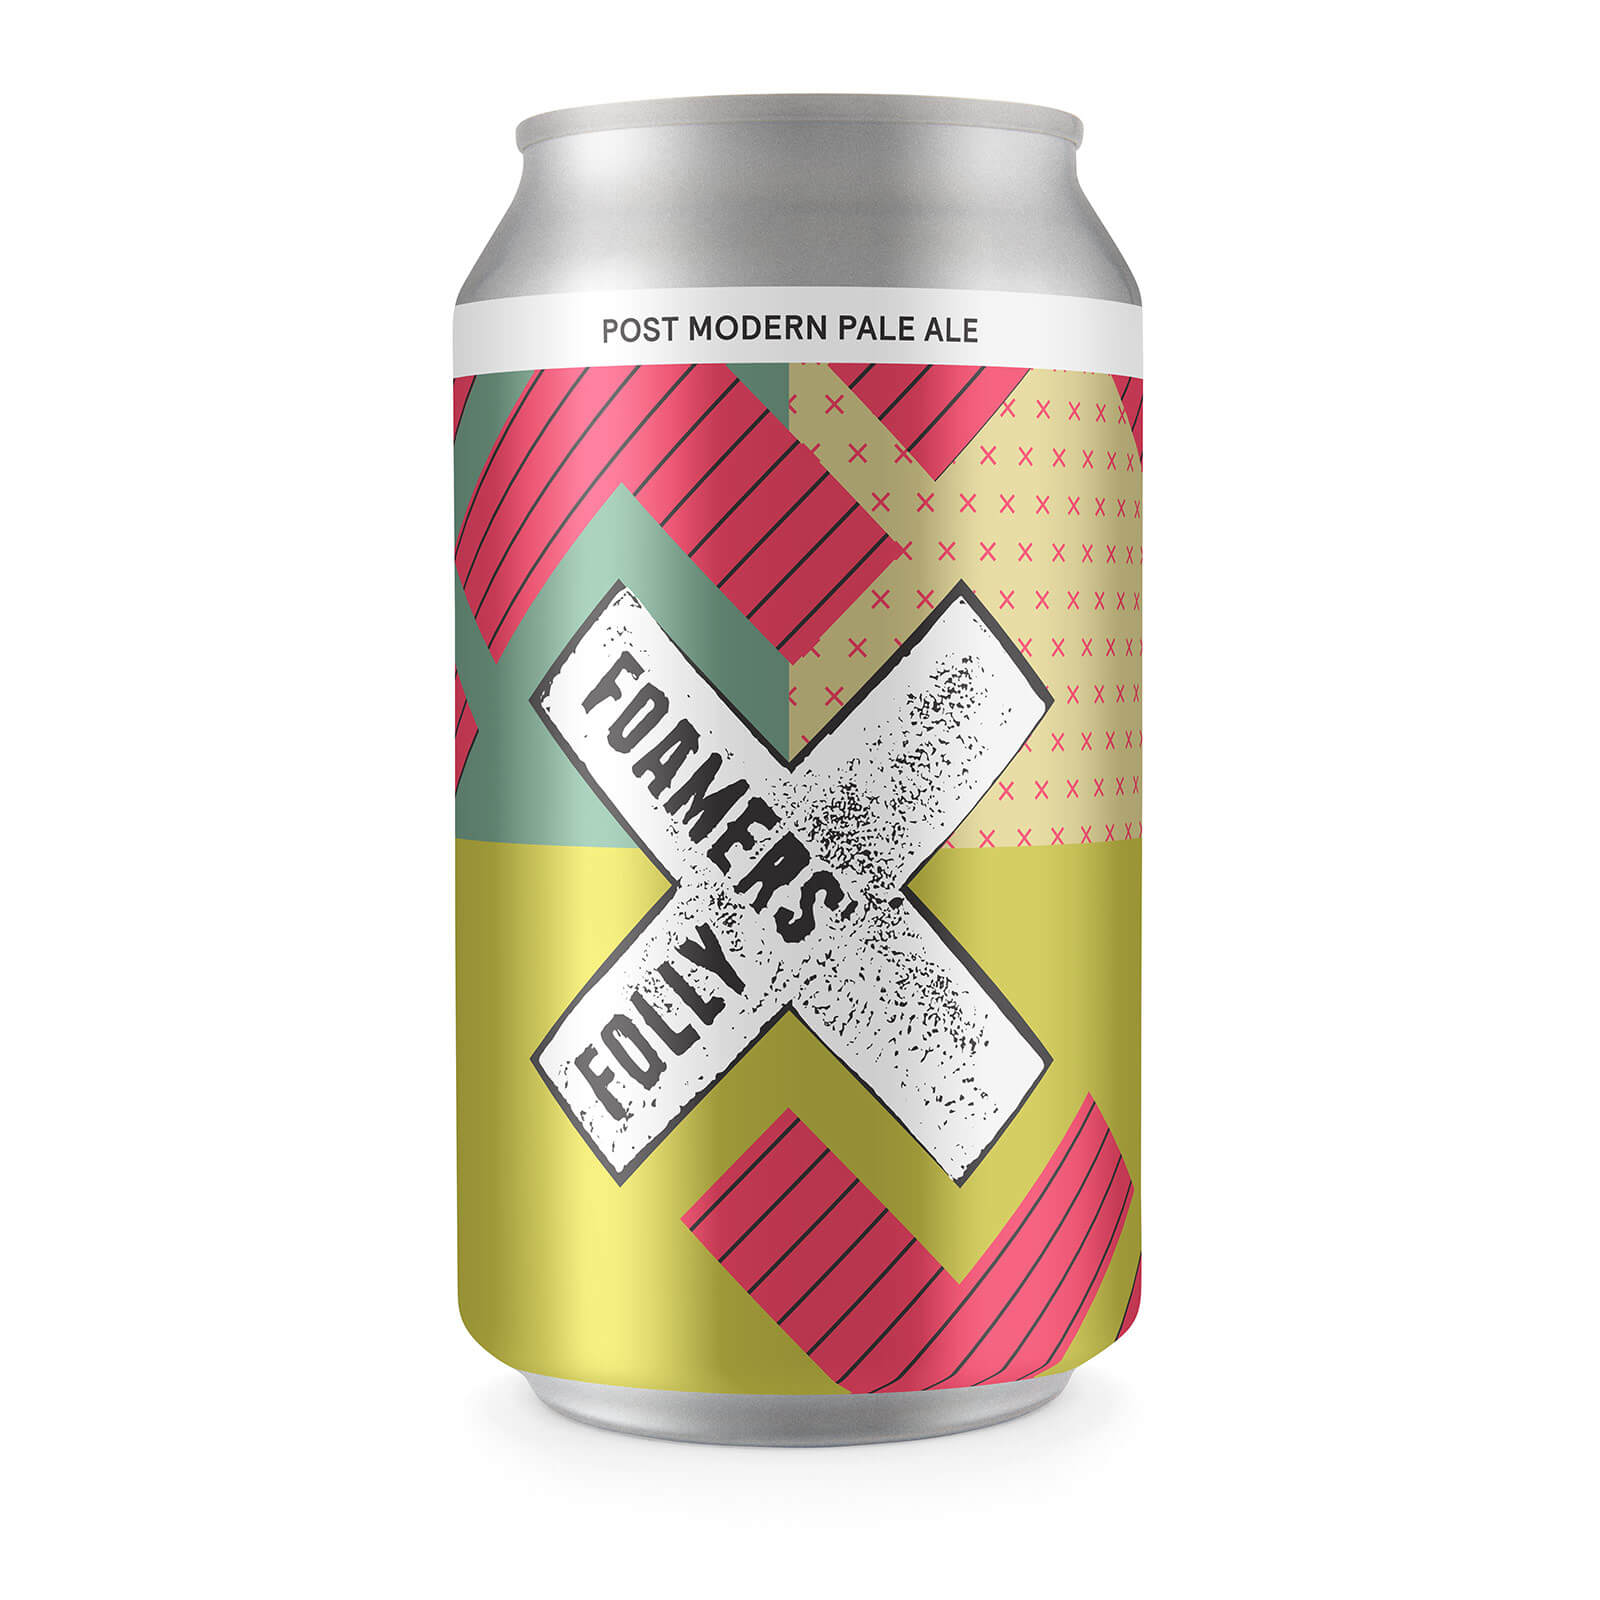 Foamers' Folly Brewing Co. Post Modern Pale Ale can design